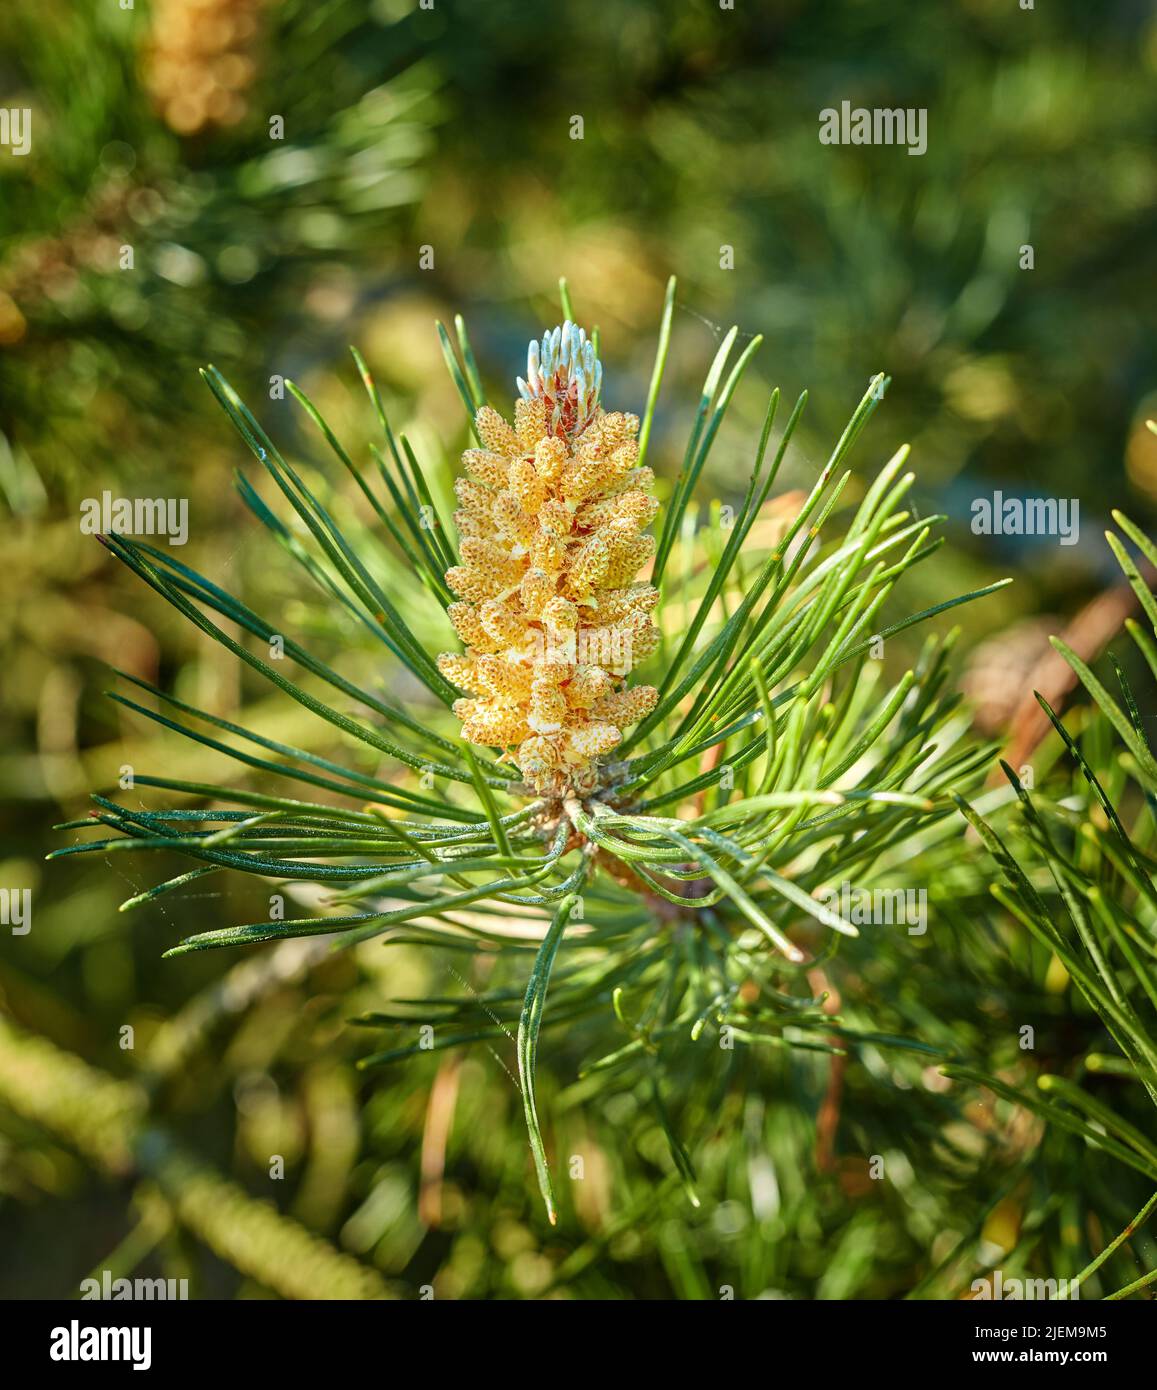 Closeup of a red pine tree branch growing in an evergreen boreal forest. Coniferous forest plant in spring on a sunny day against a blurred background Stock Photo